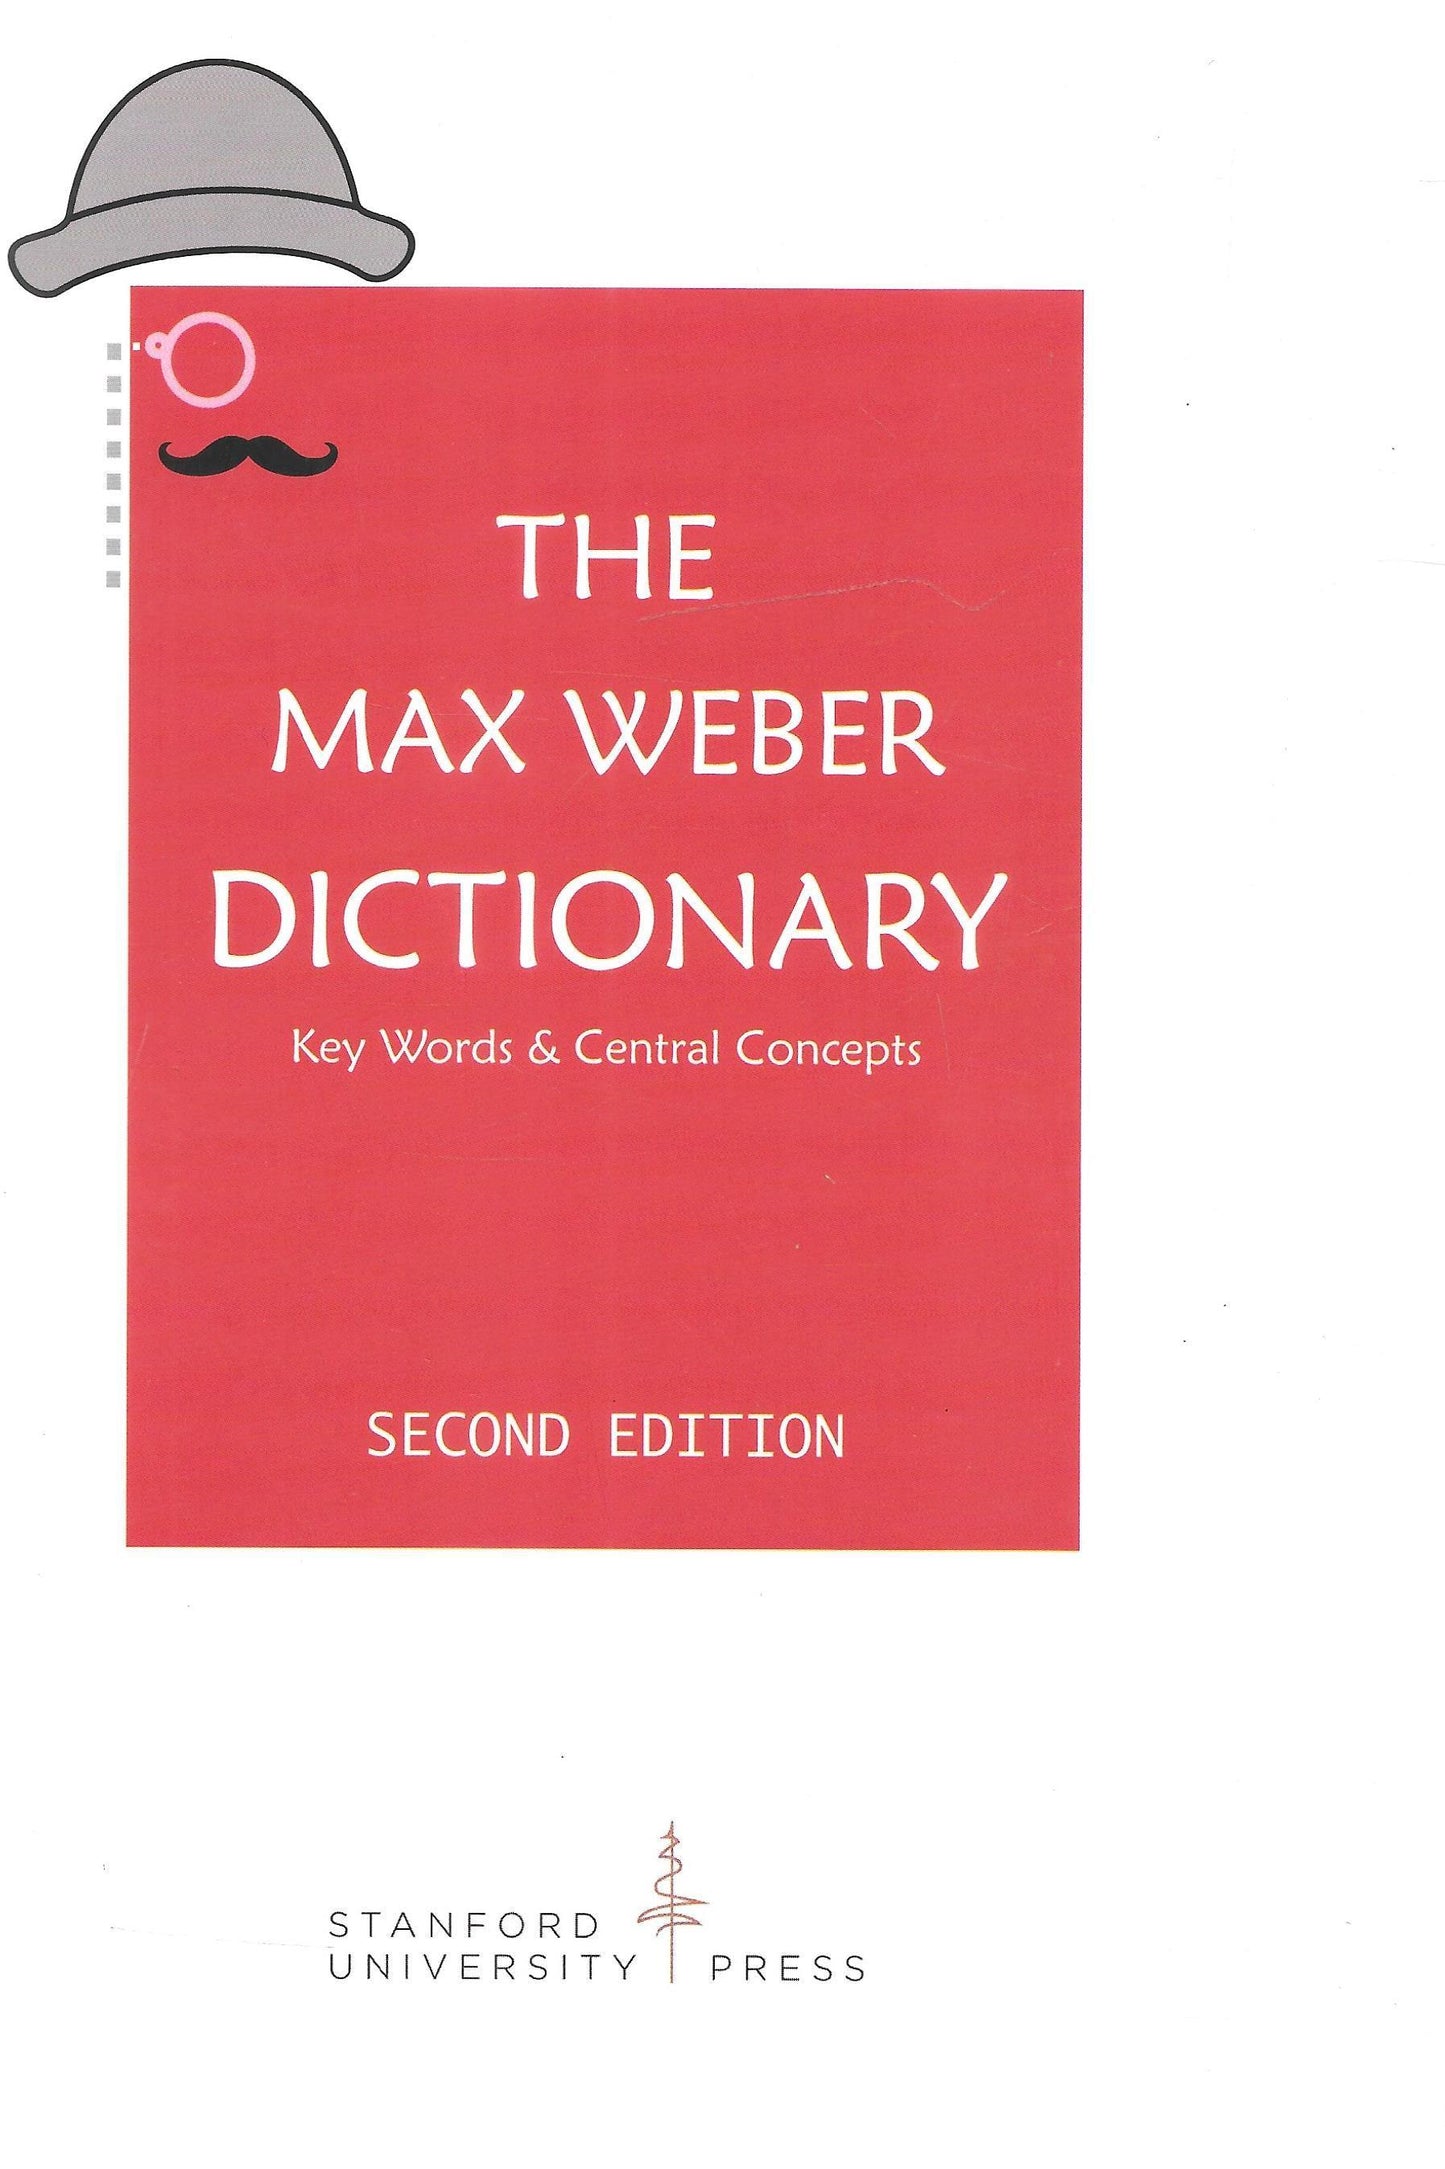 The Max Weber Dictionary - Key Words & Central Concepts